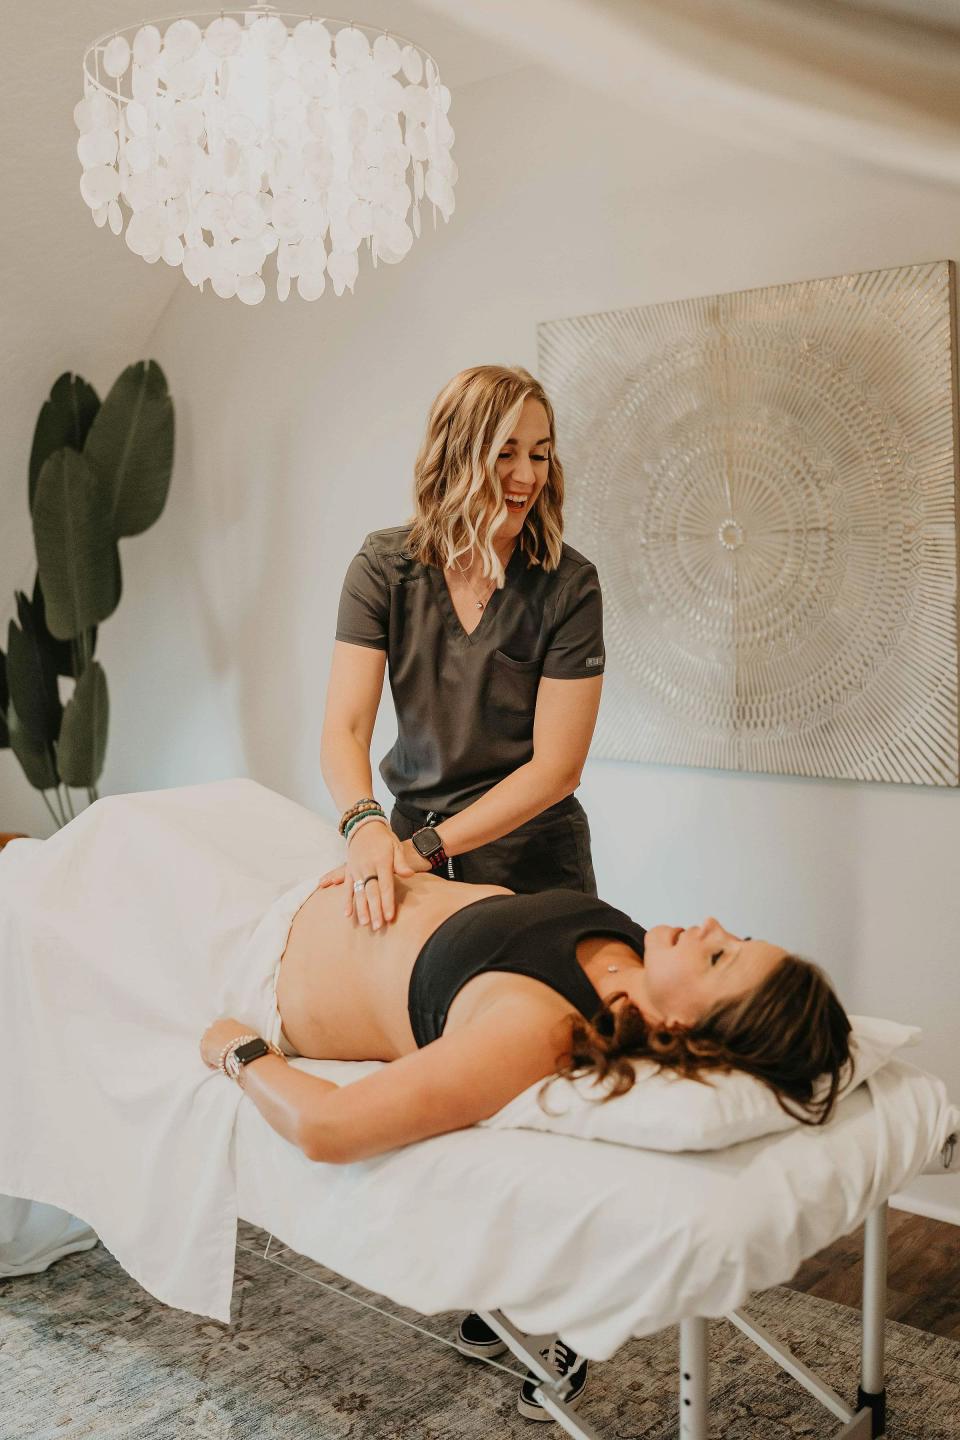 Tori Black is a practitioner of Mercier Therapy, which uses use external deep pelvic massage and manipulation to promote blood flow and mobility and, hopefully, promote fertility. She opened her practice in Gadsden last fall.